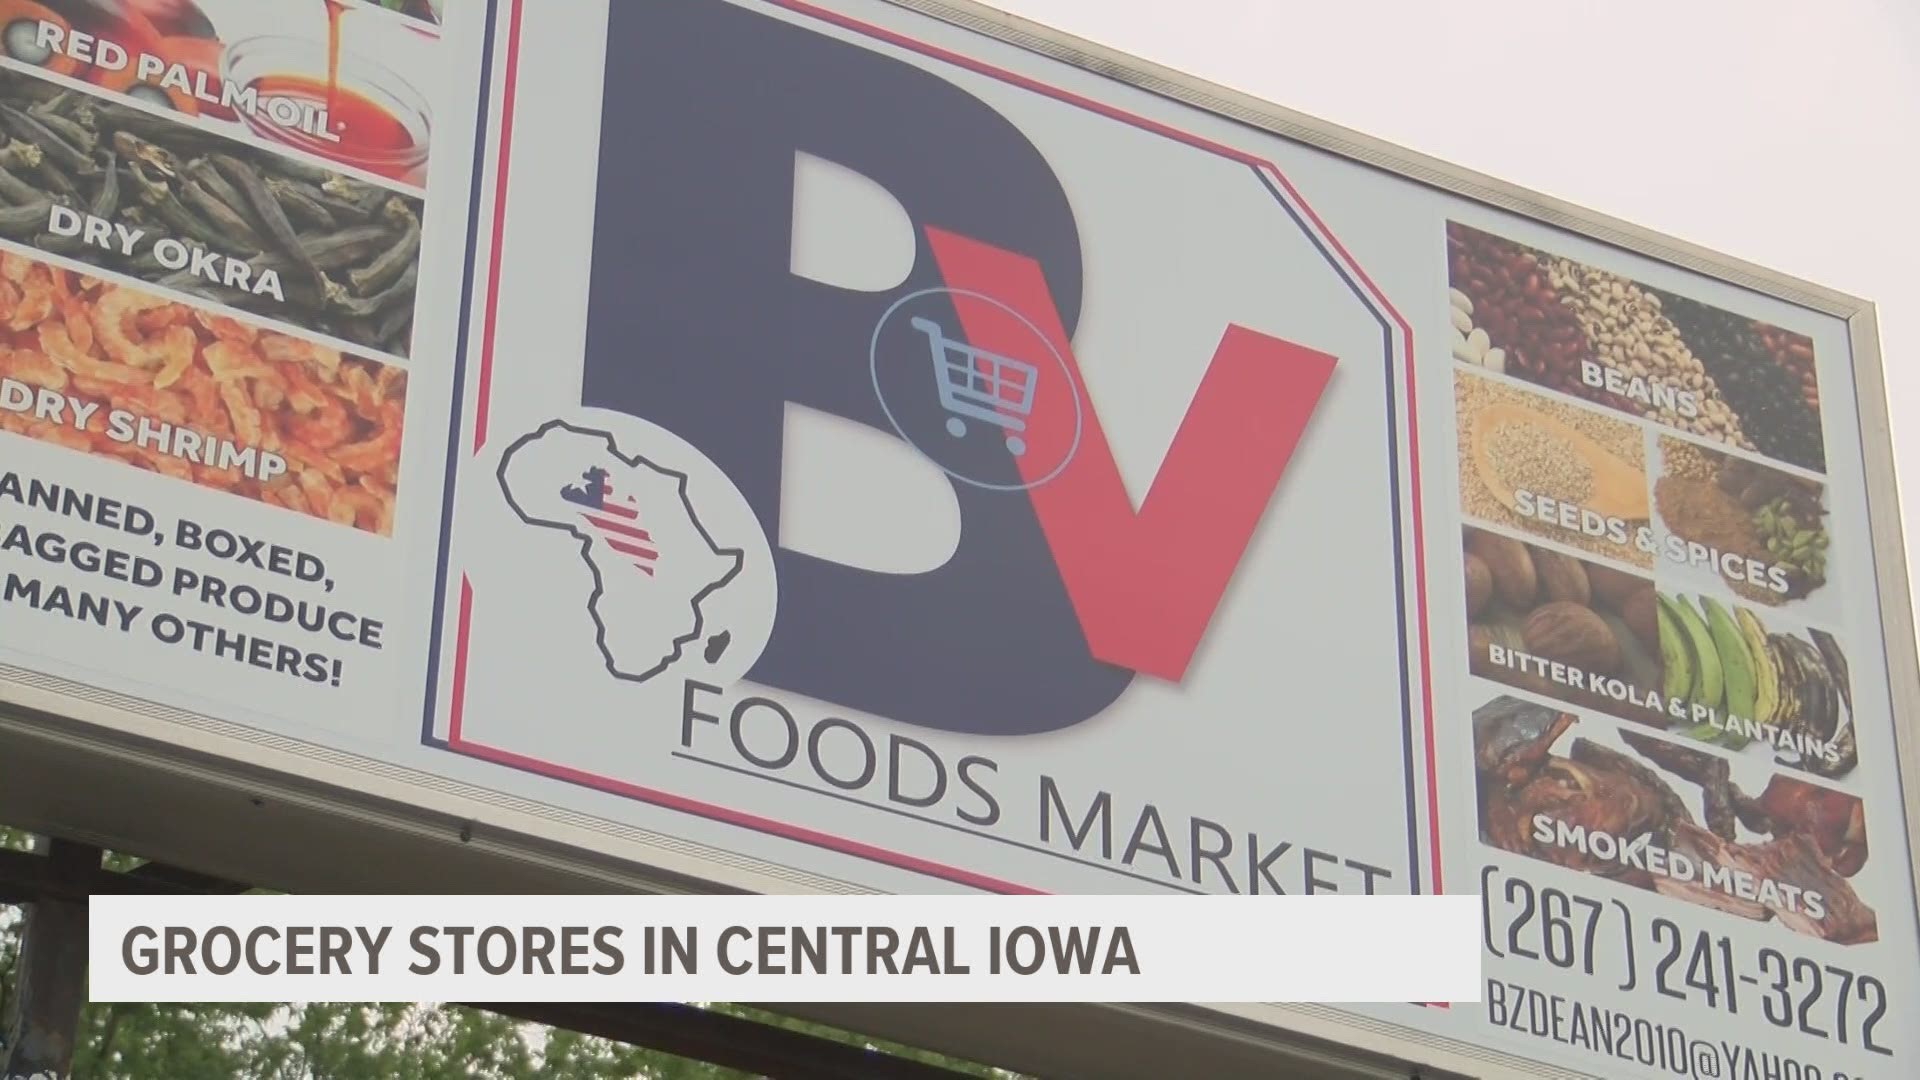 "That's my way of connecting": B and V African Food Market owner Benjamin Dean explains what his store brings to Des Moines.